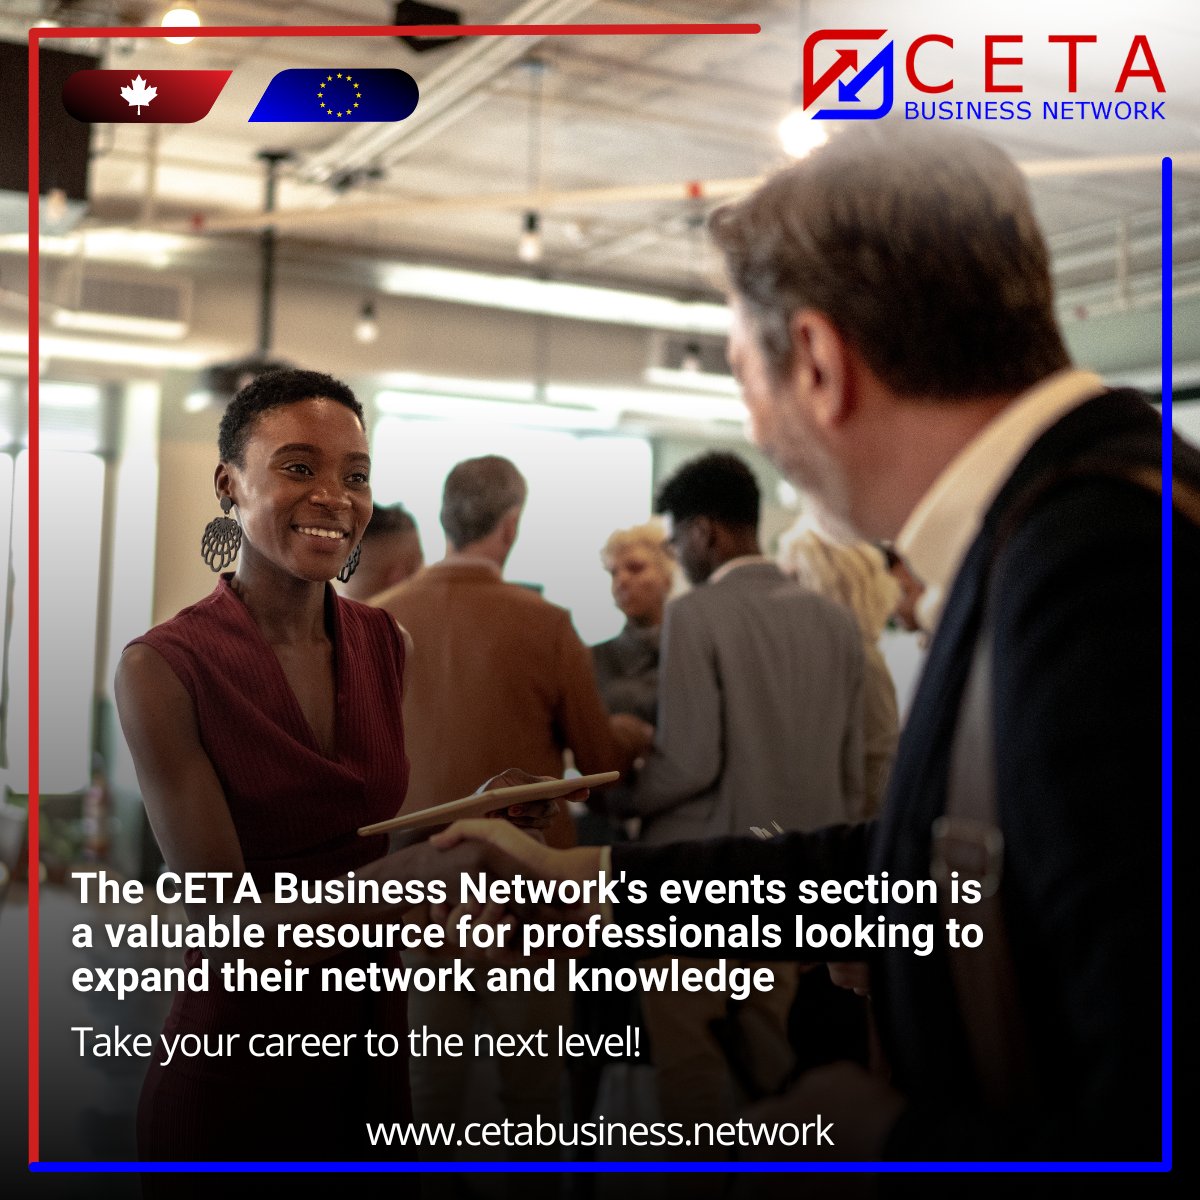 Keep yourself updated on the latest business trends and developments by attending events featured on the CETA Business Network's events section.
cetabusiness.network/events/

#CETABusinessNetwork #CETA #Business #Europe #Canada #BusinessTrends #ProfessionalDevelopment